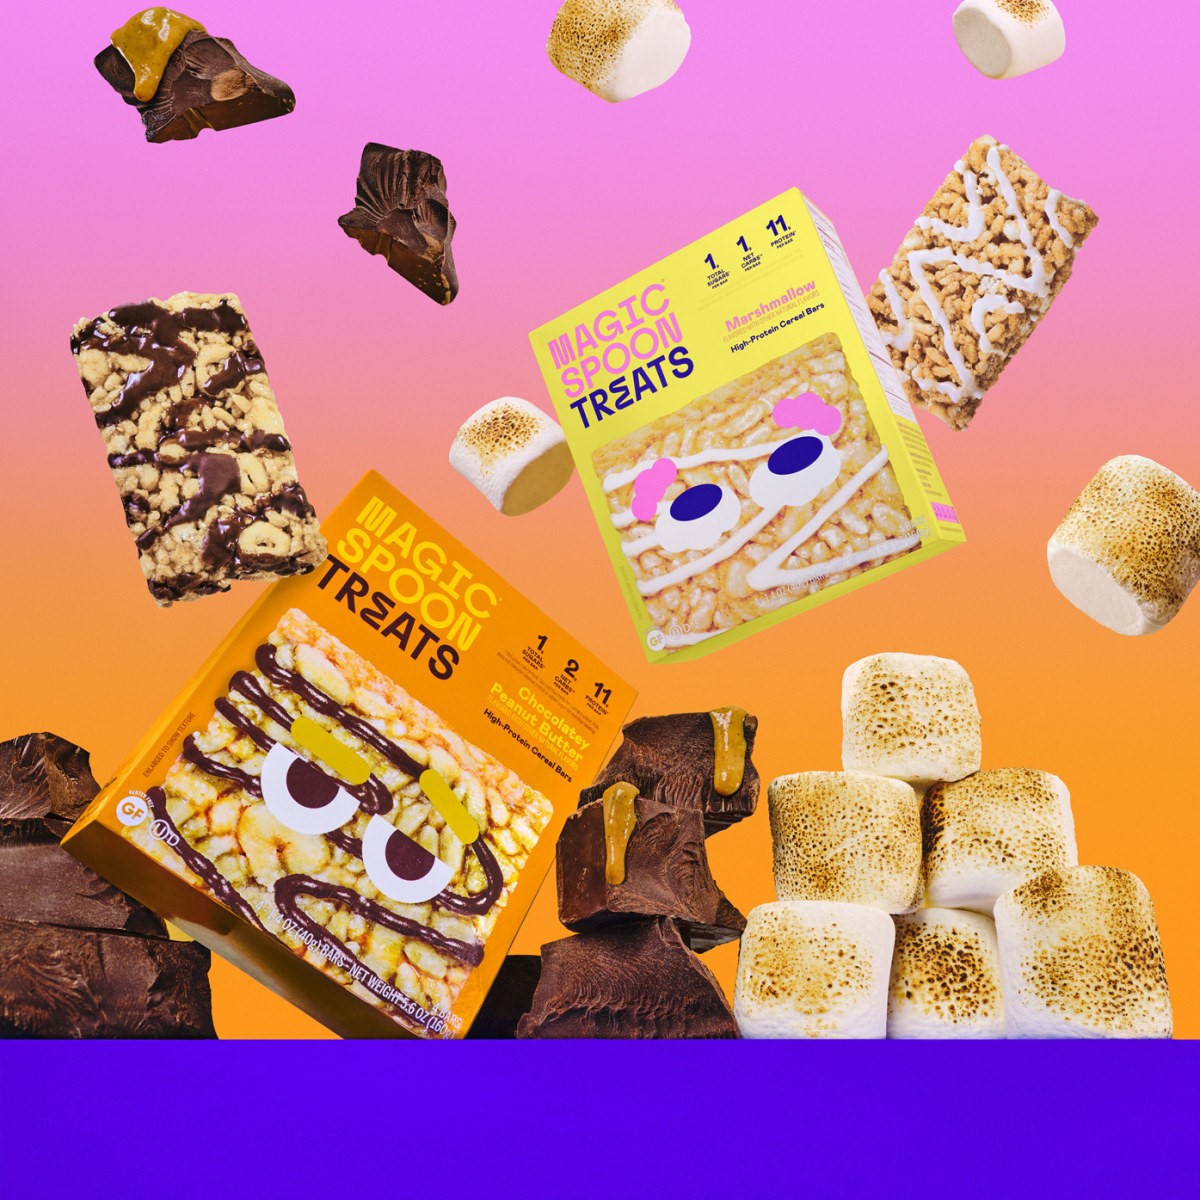 Magic Spoon reinvented sugar cereal nostalgia. Now it’s taking aim at Rice Krispies treats | DeviceDaily.com